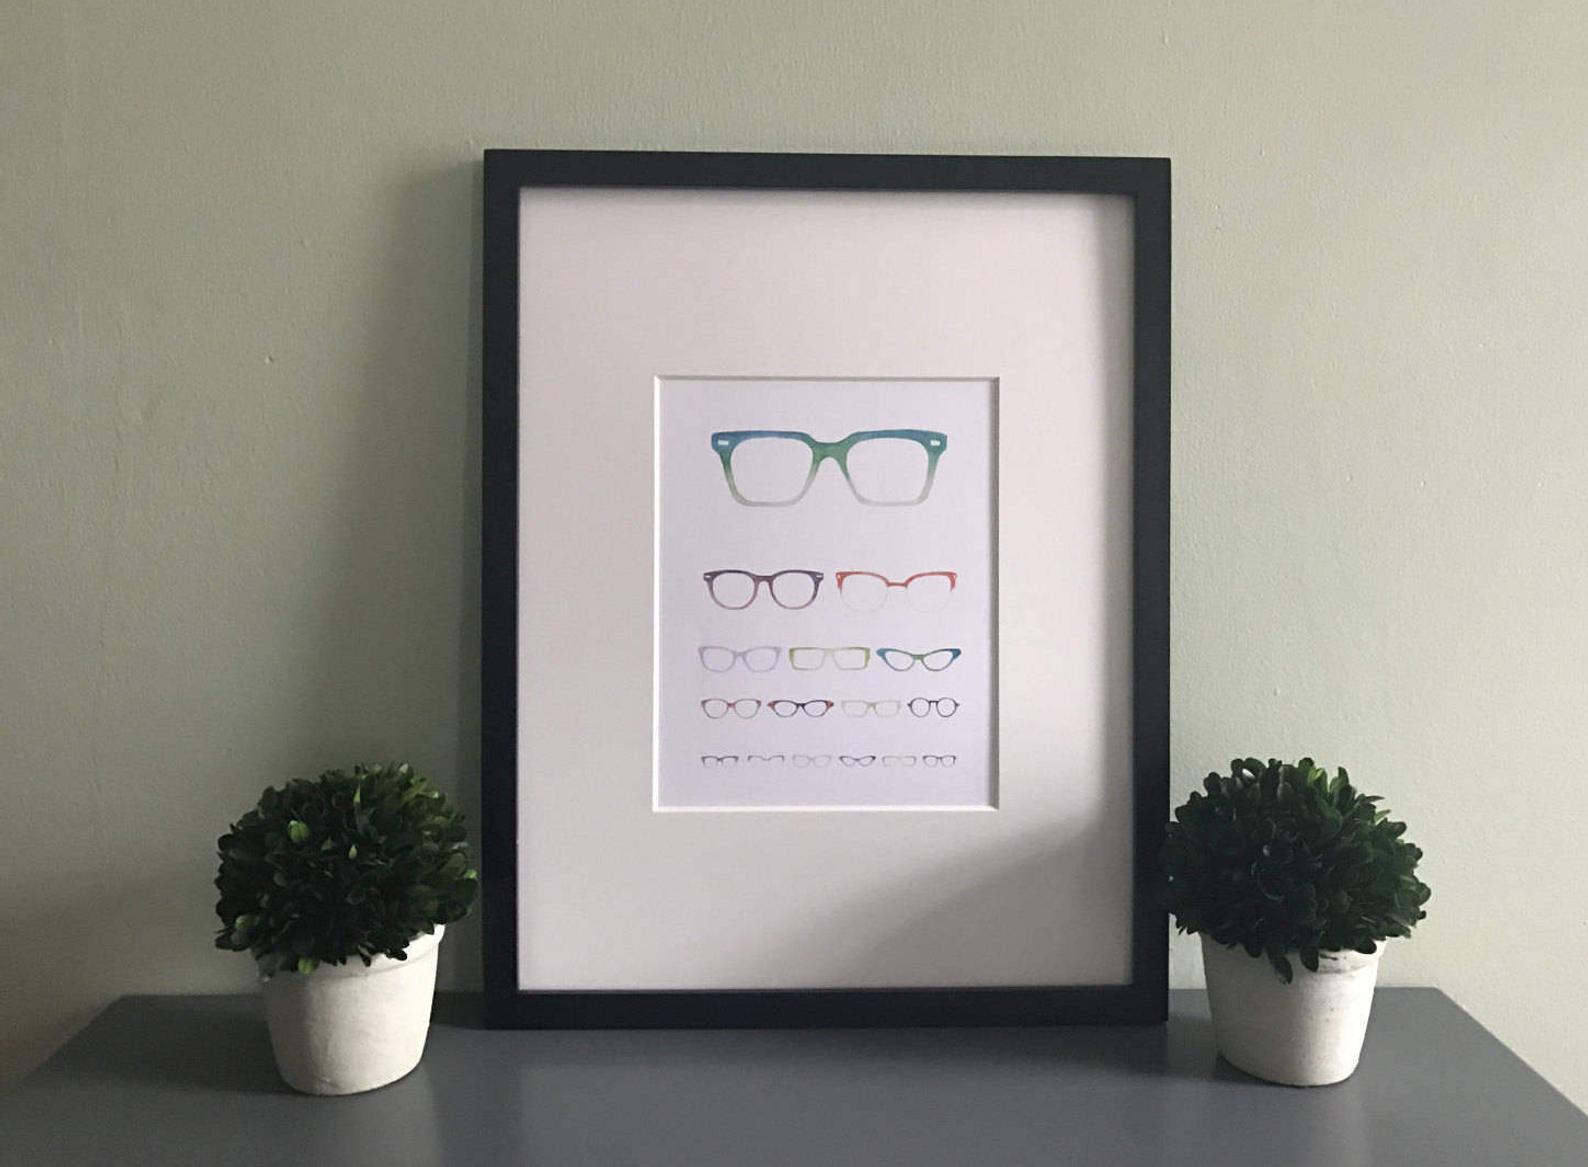 A print of an eye chart made up of varying sizes and styles of glasses. Shown in a black frame.